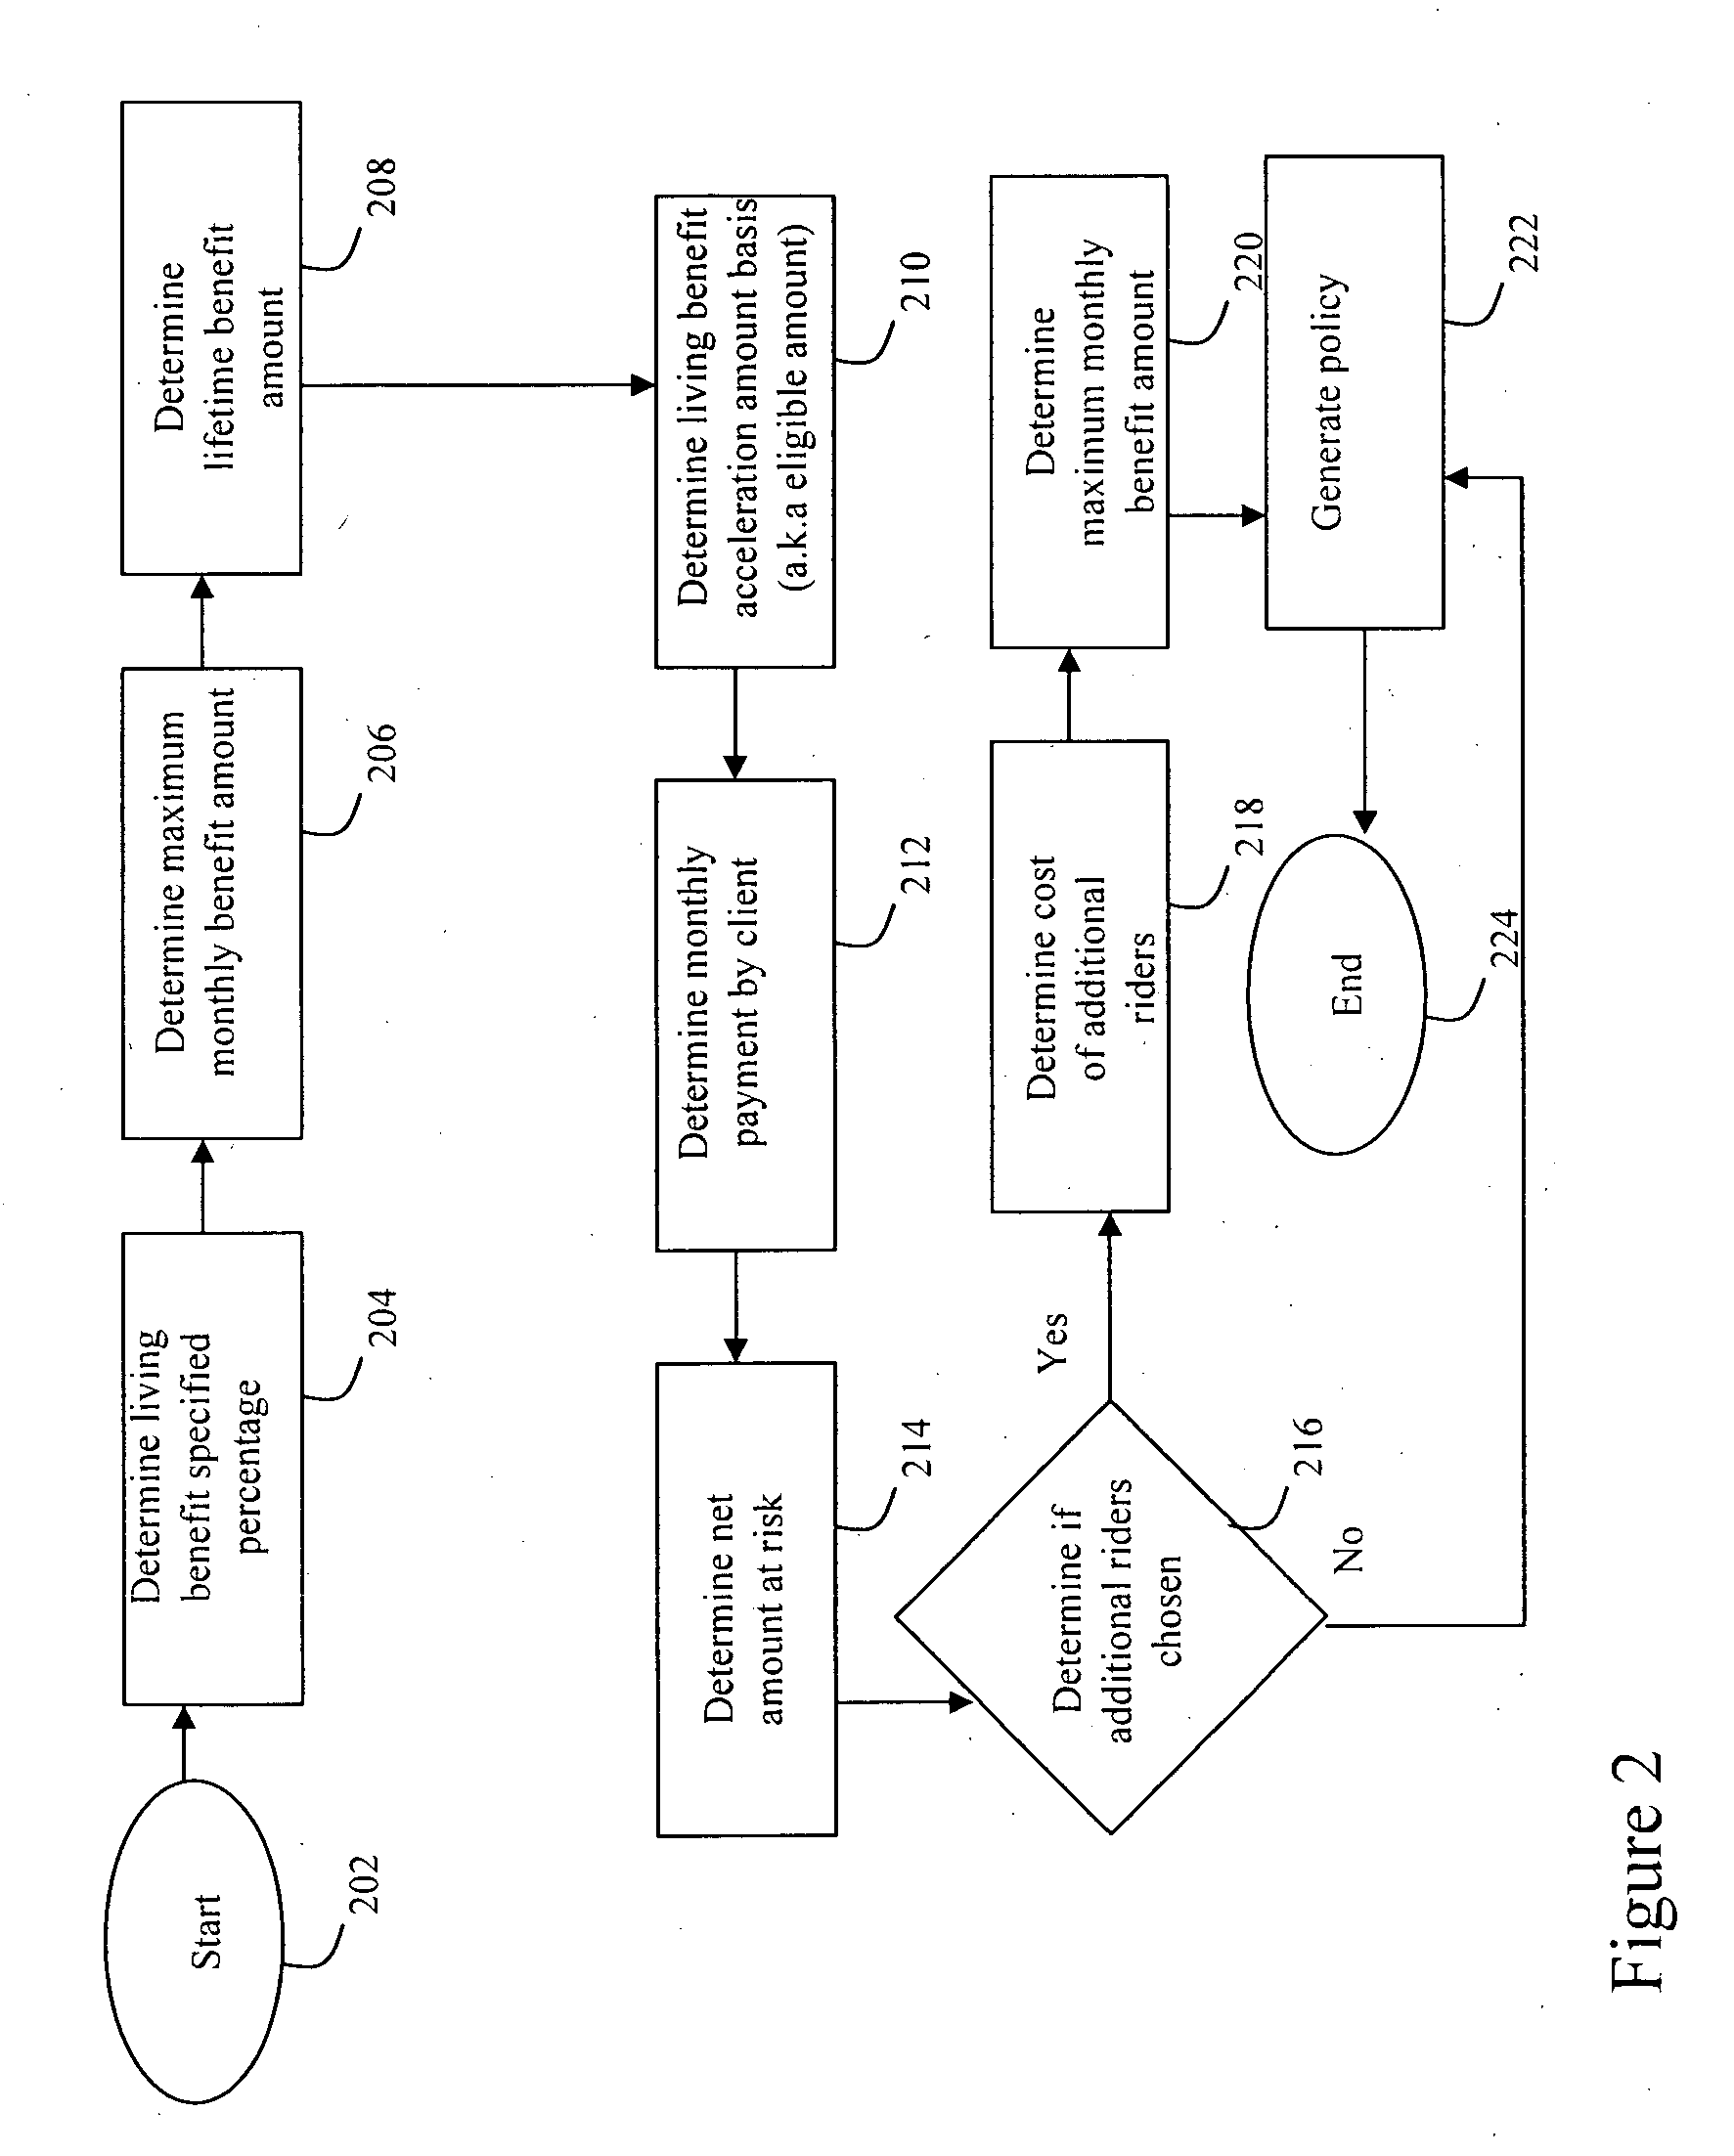 Accelerated benefit insurance product management and distribution system and method